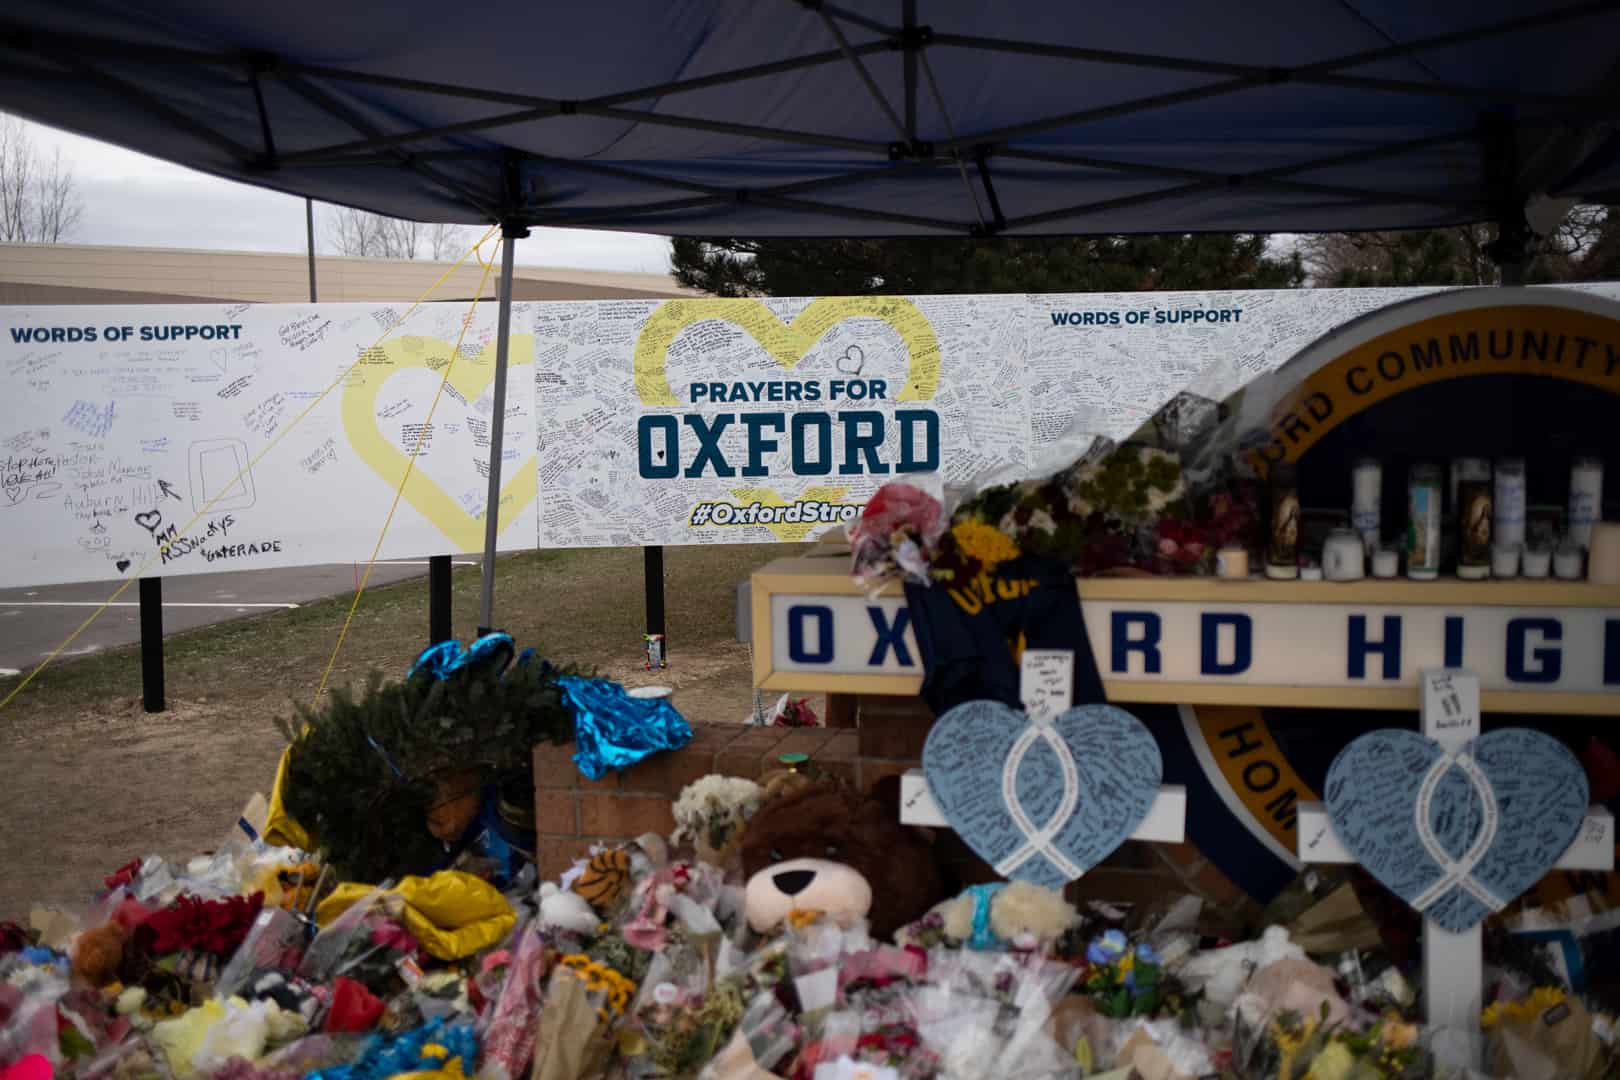 Two students have filed a lawsuit against the Oxford school system after the shooting that claimed four lives and injured others.